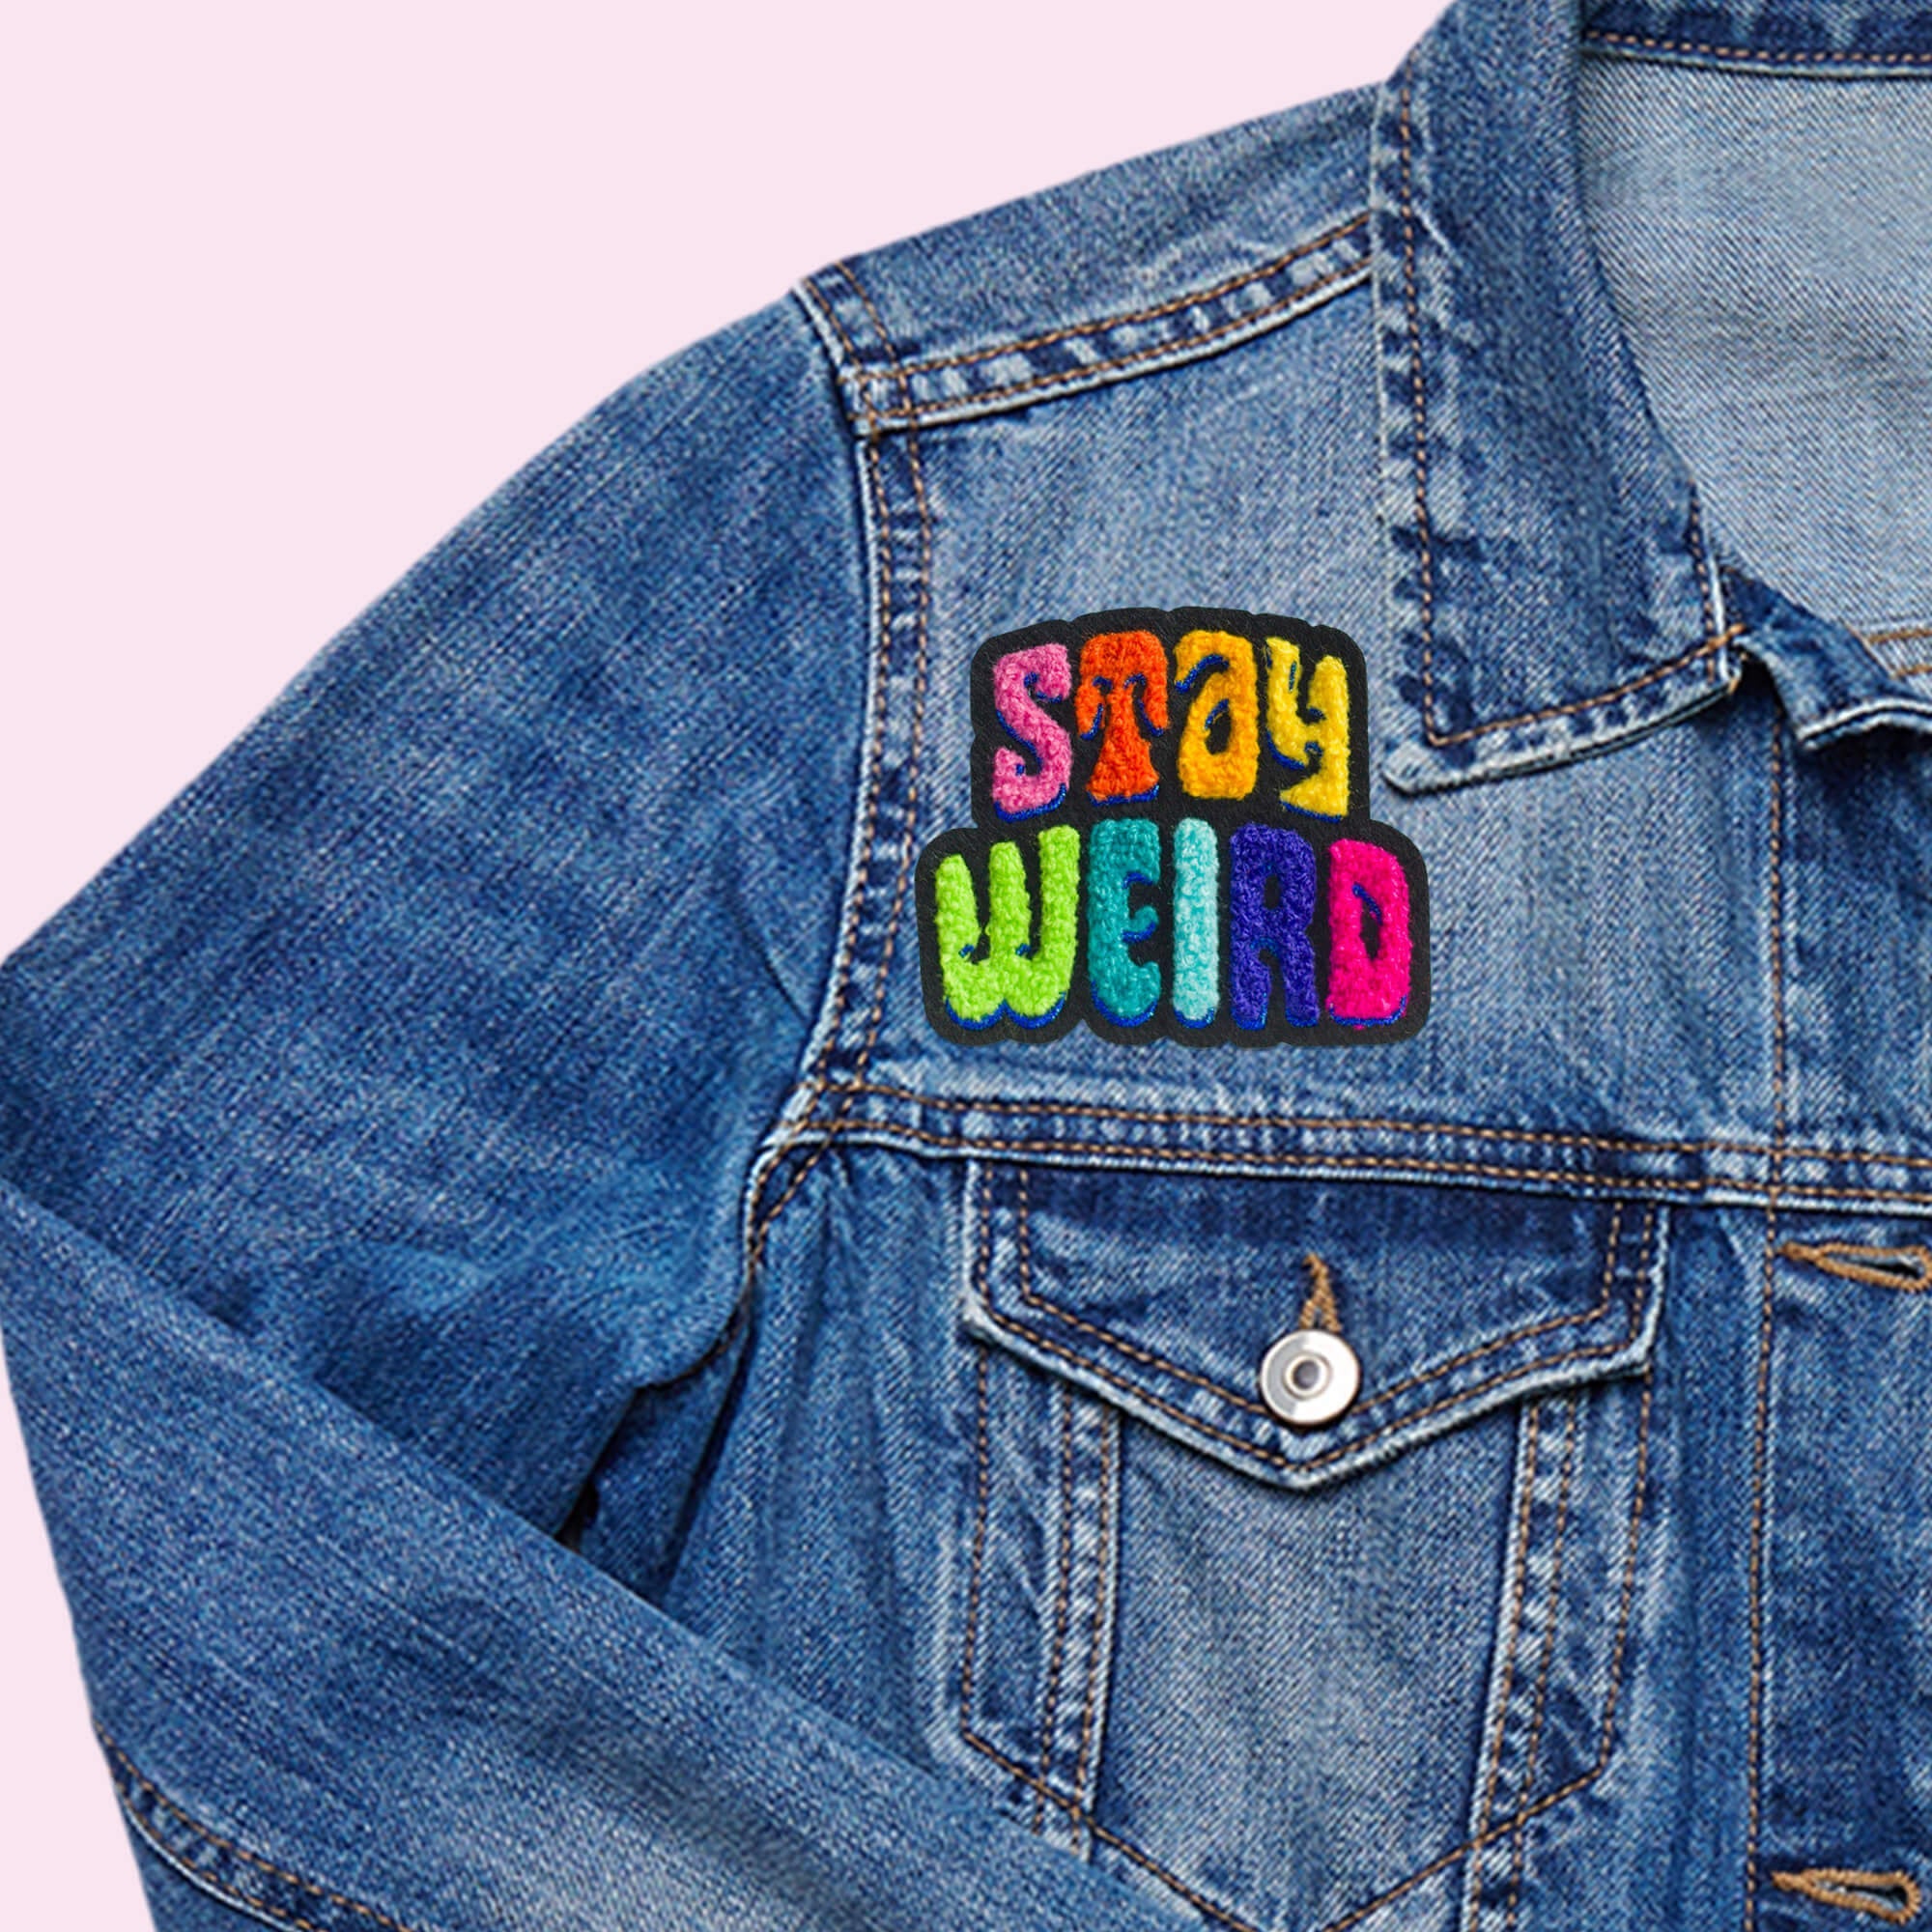 Stay Weird Vintage Chenille Patch